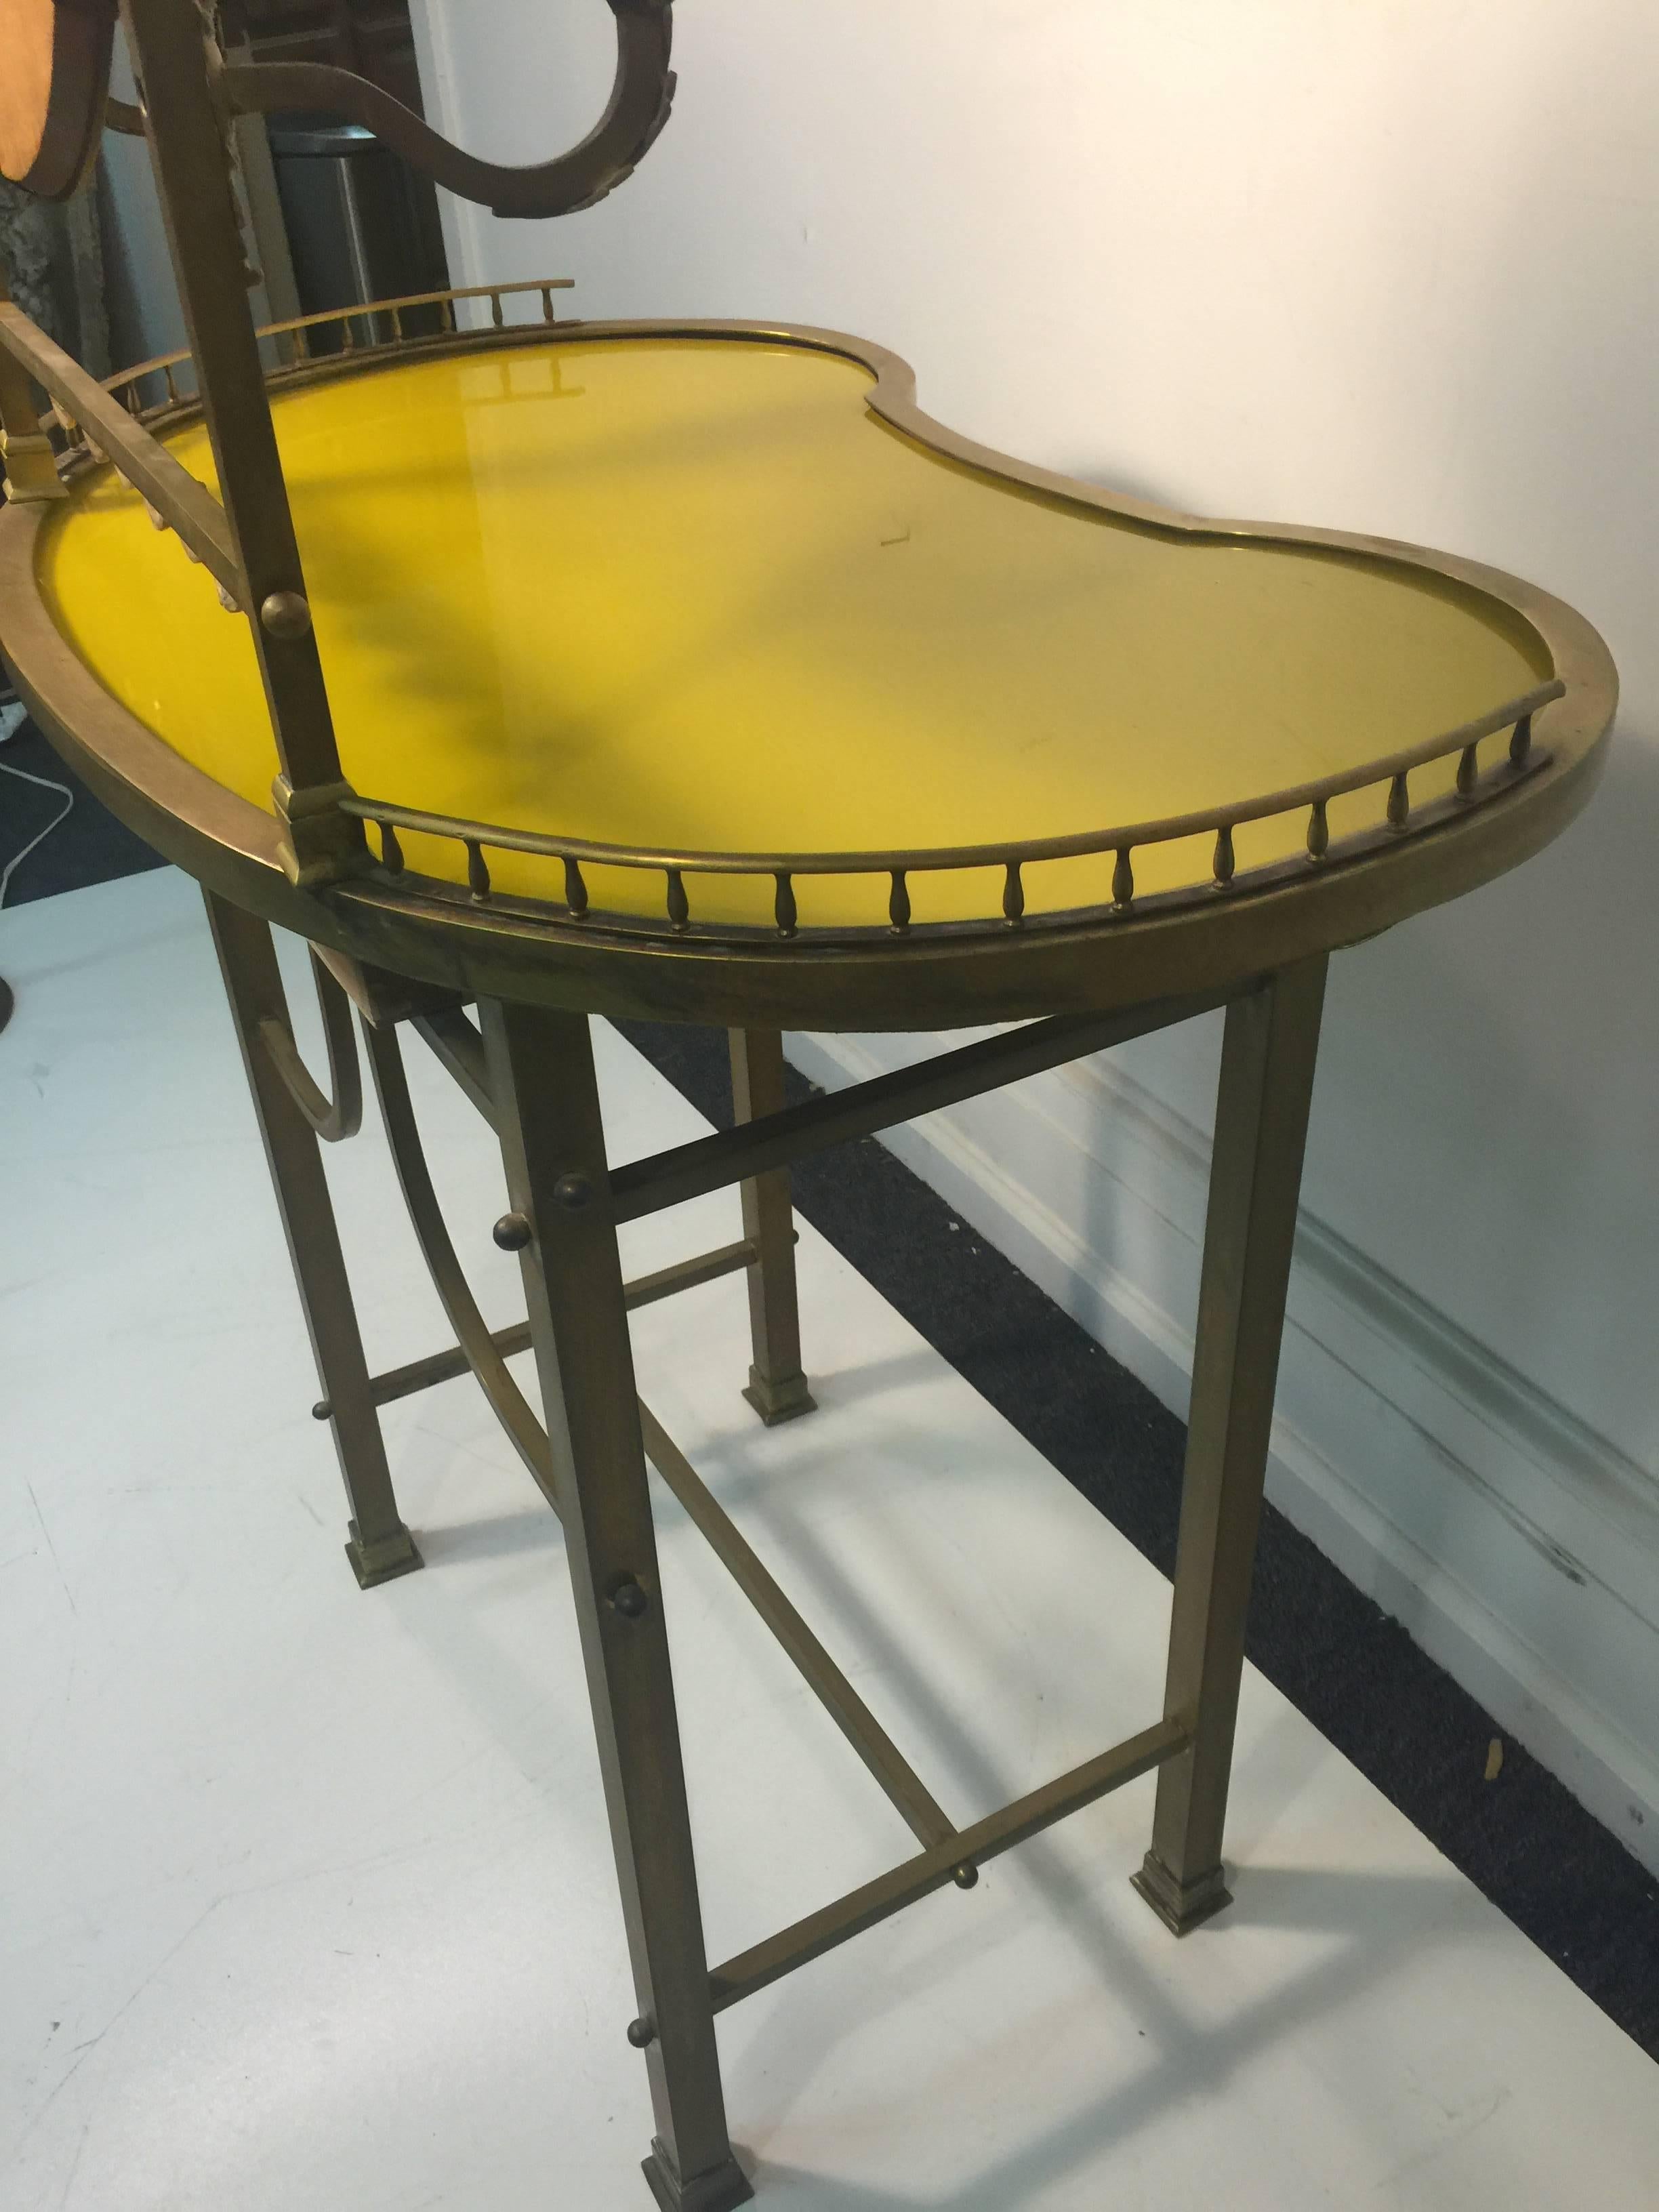 Brass Exquisite 19th Century French Vanity with Hand-Painted Yellow Glass Top For Sale